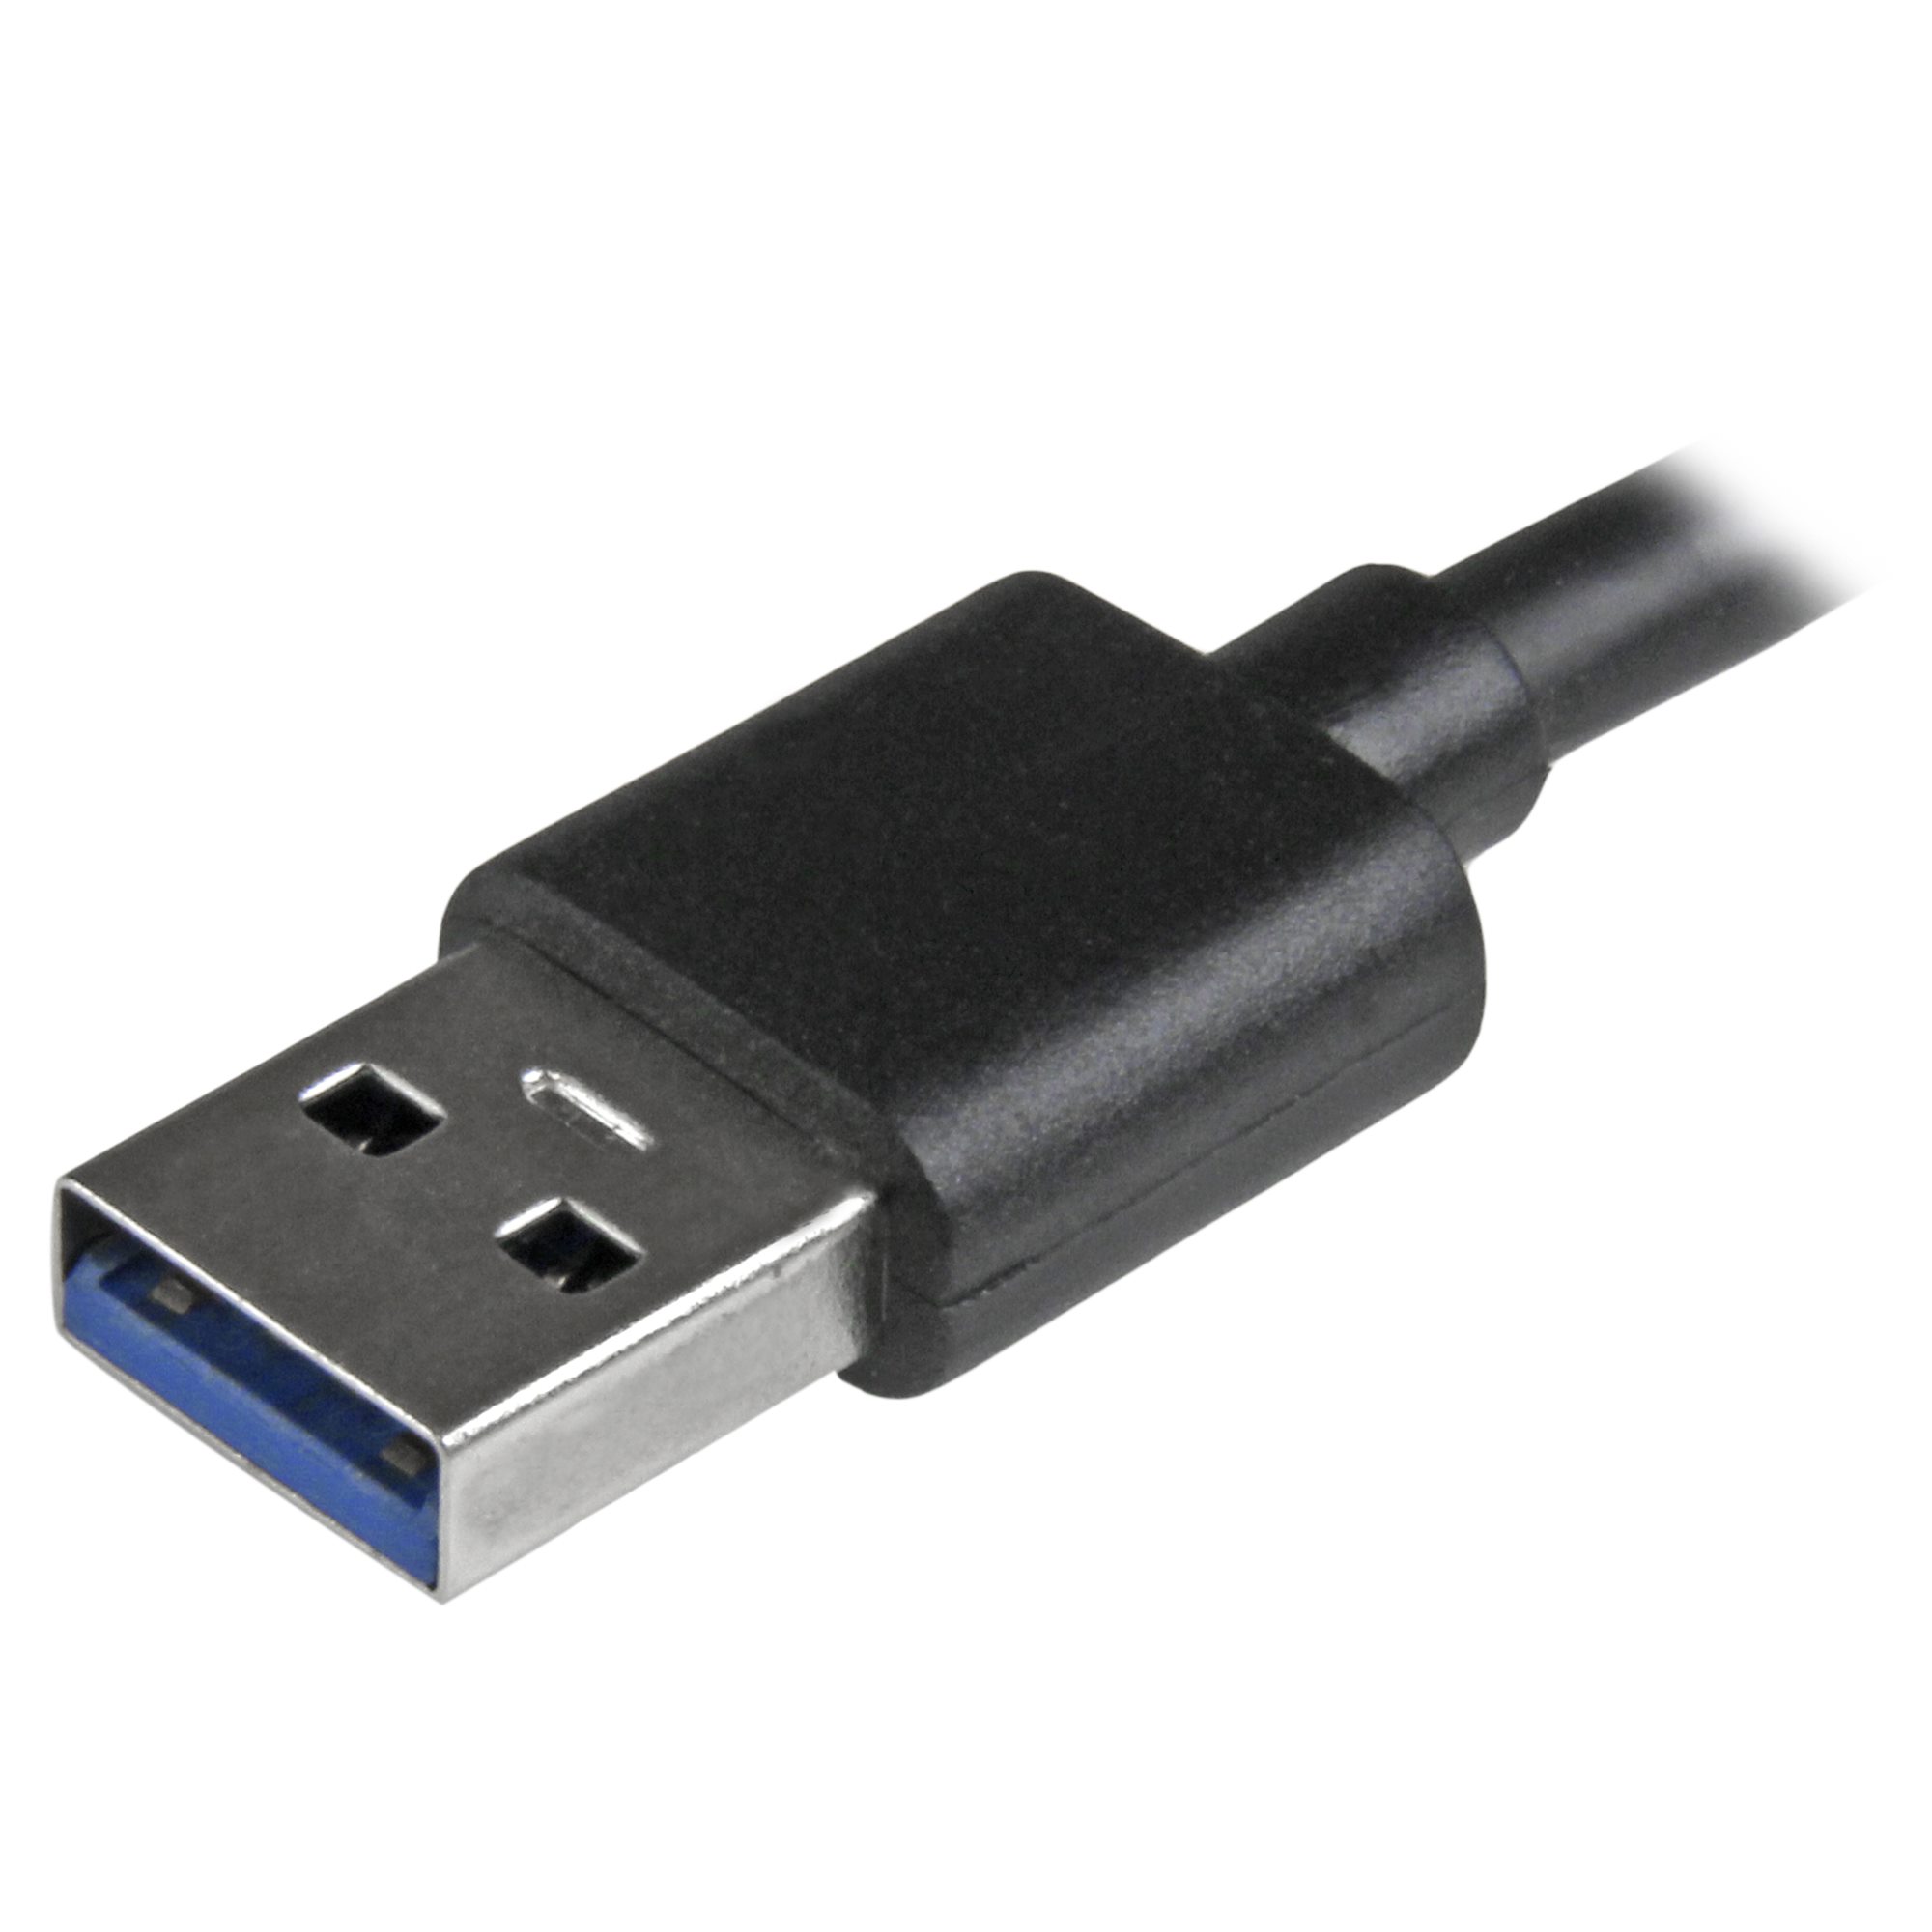 StarTech.com Adapter cable with UASP support for 2.5 SATA SSD/HDD drive -  USB312SAT3CB - USB Adapters 